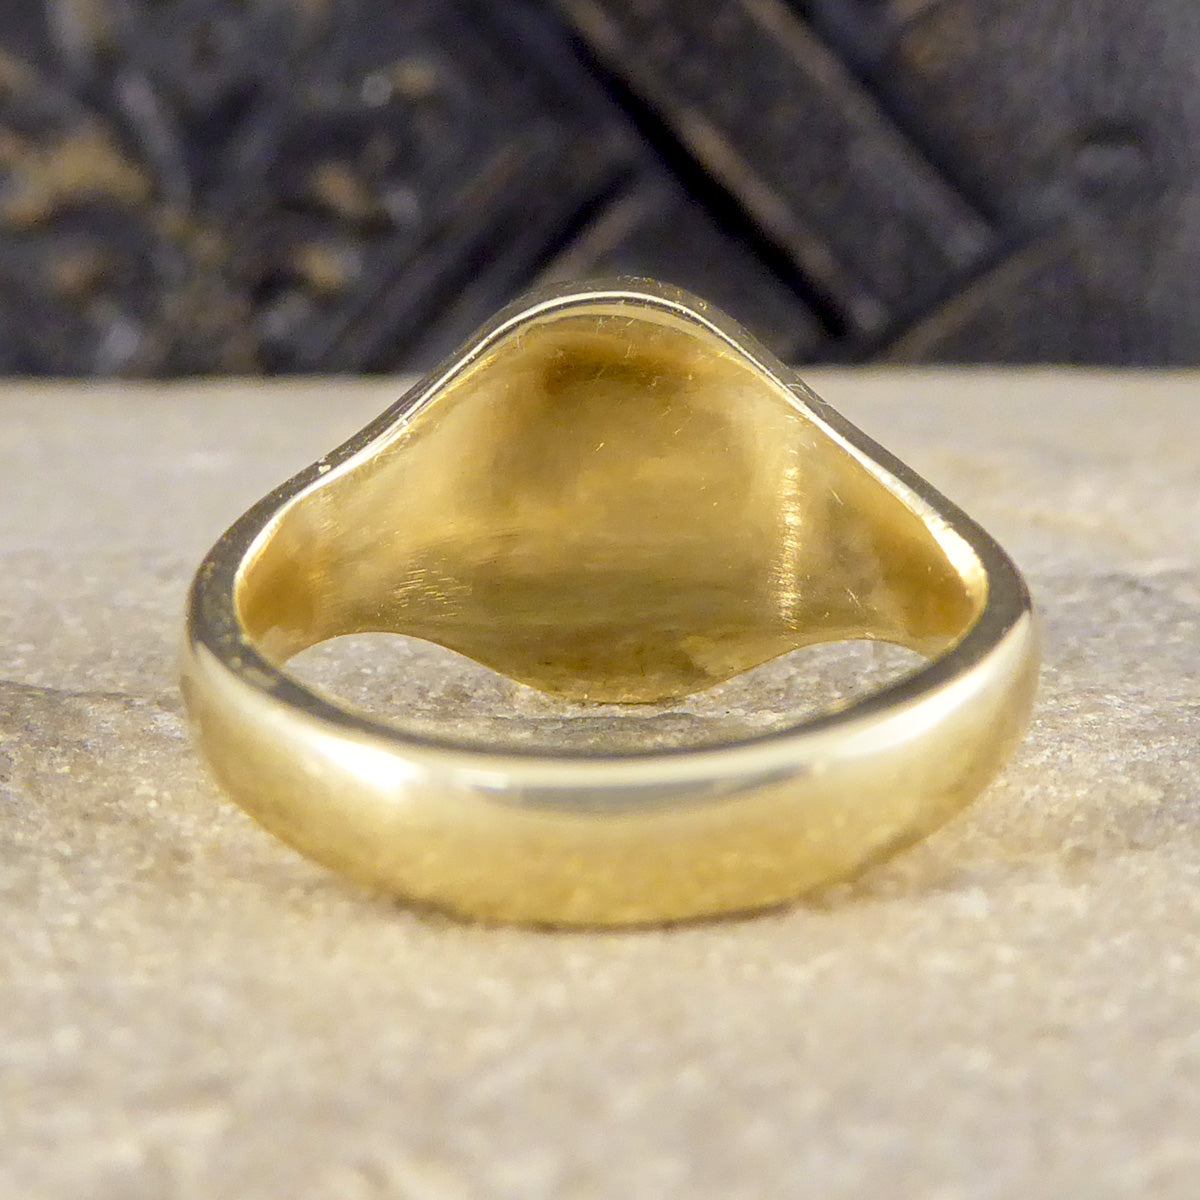 "I Die For Those I Love" Crested Signet Ring in Yellow Gold